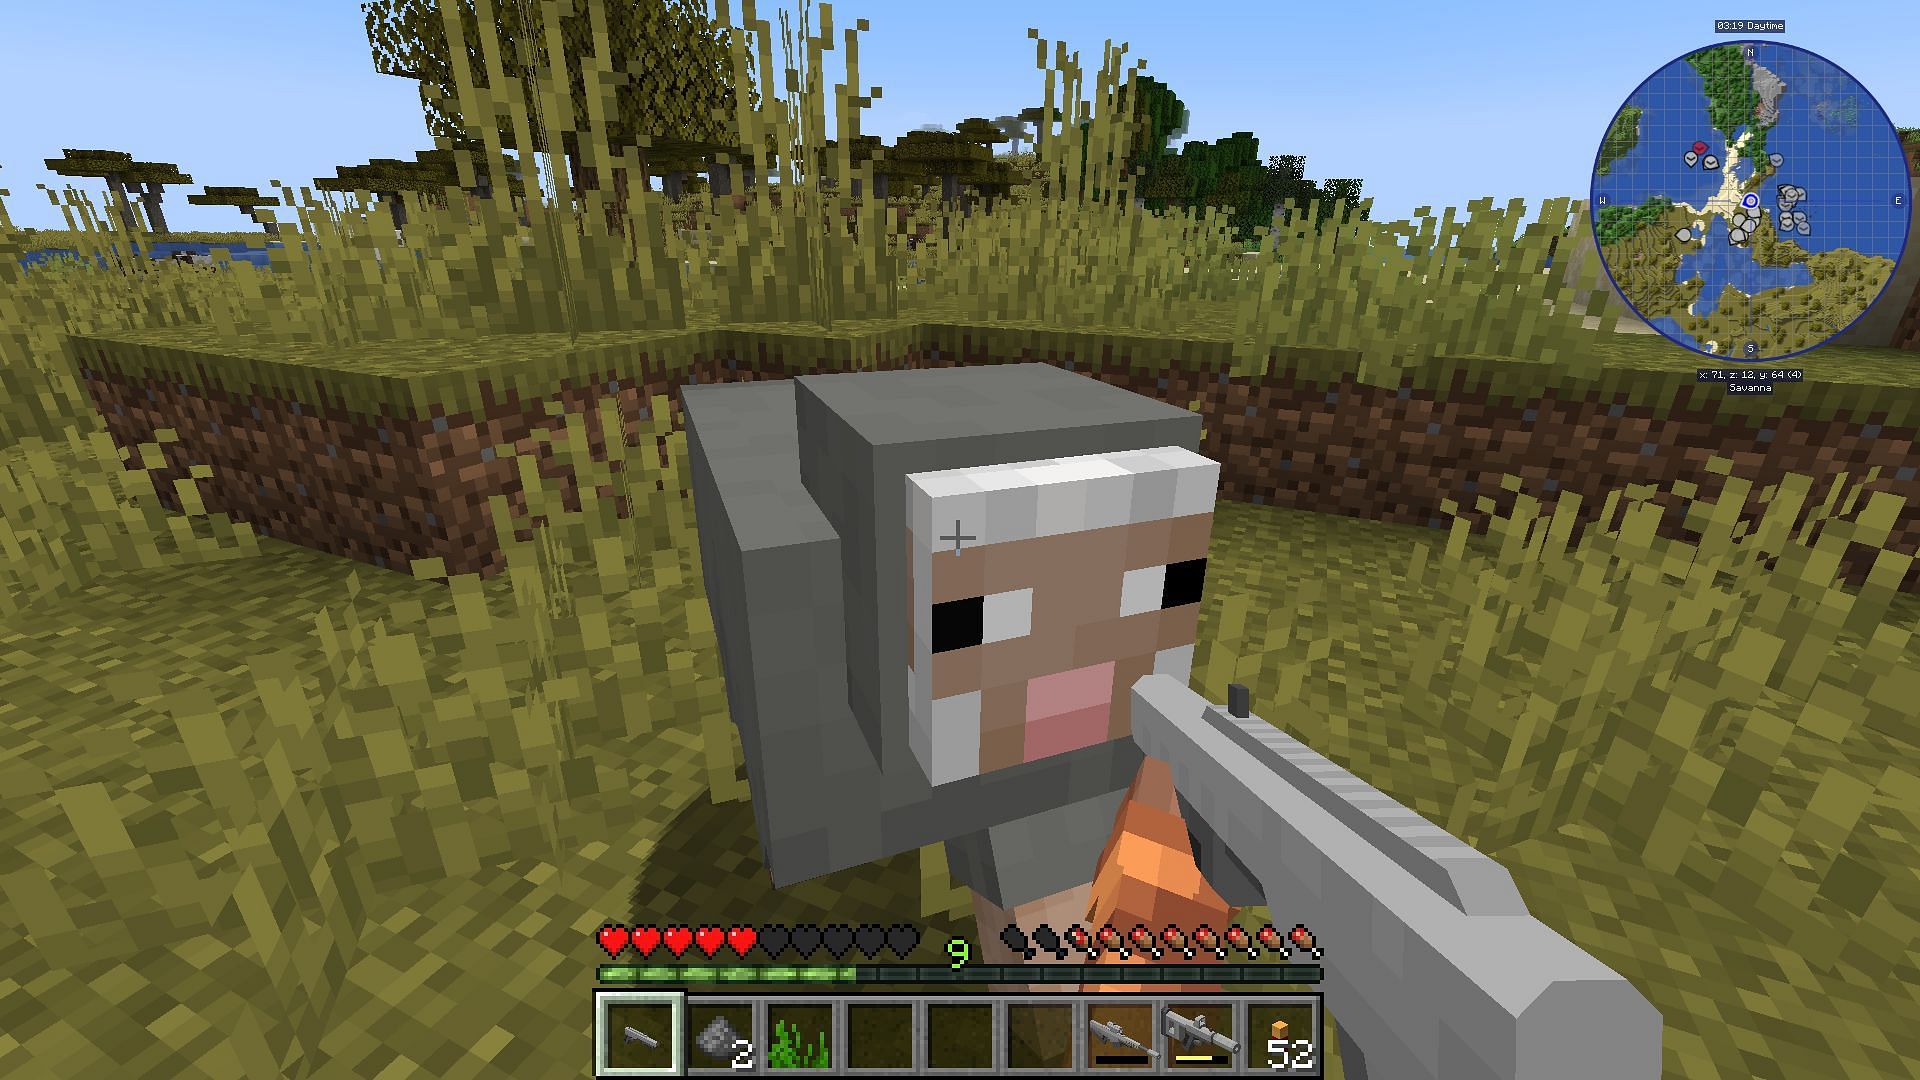 A player hunting a sheep with a shotgun (Image via Minecraft)